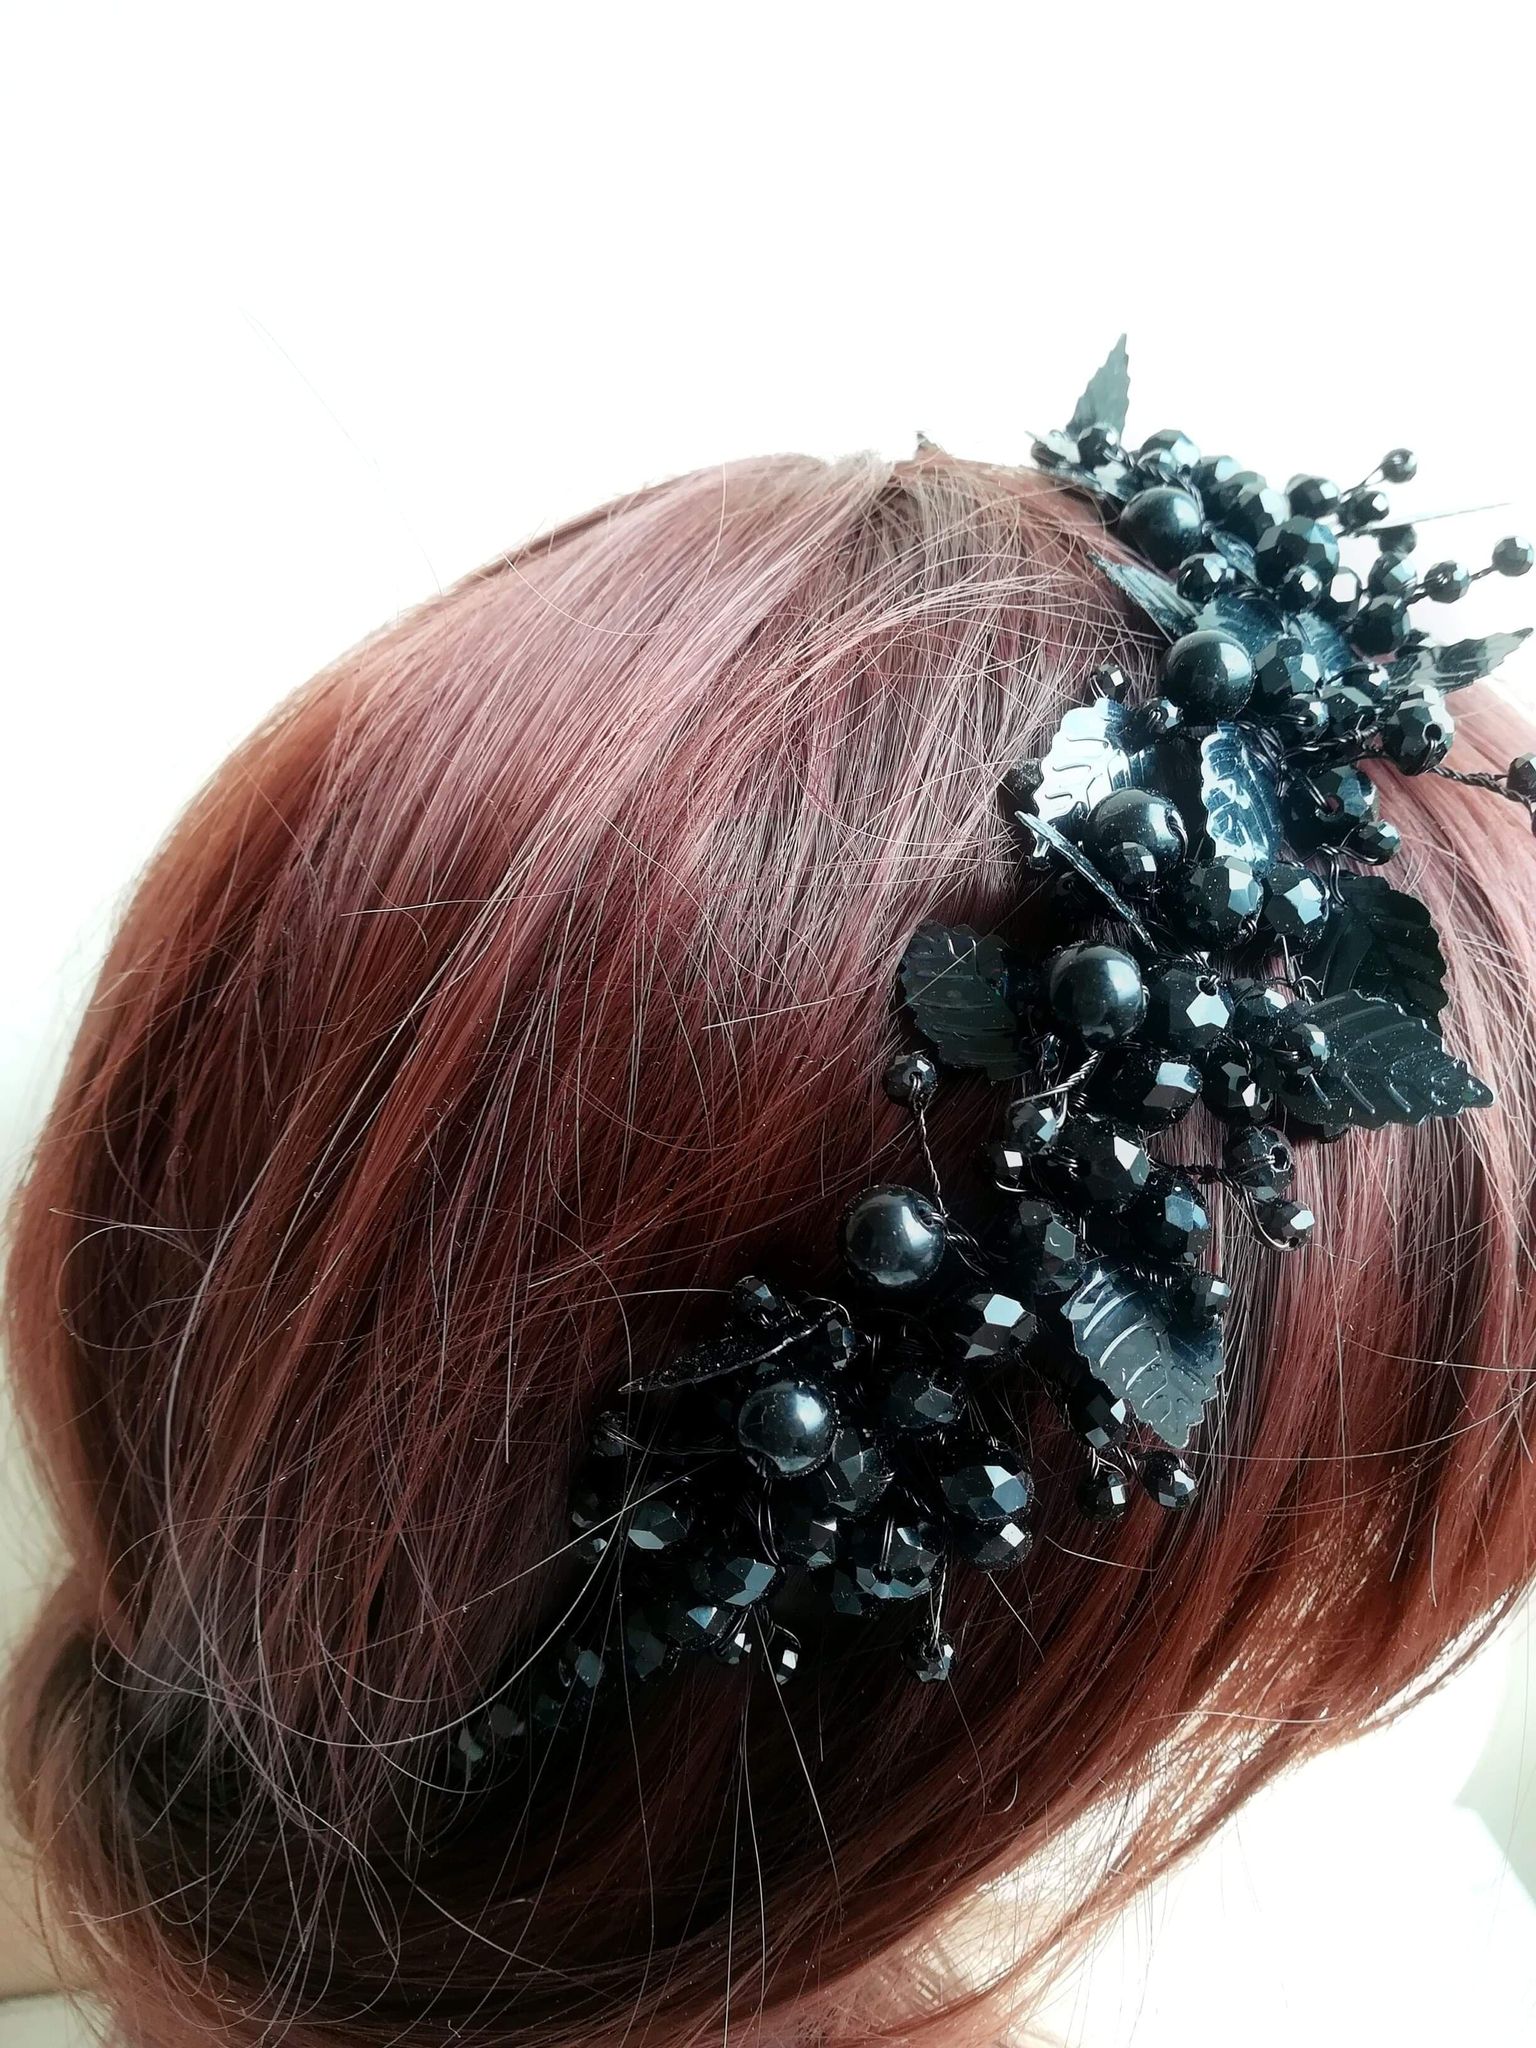  Elegant Black Tiara with Crystals and Leaves - Goddess of Night